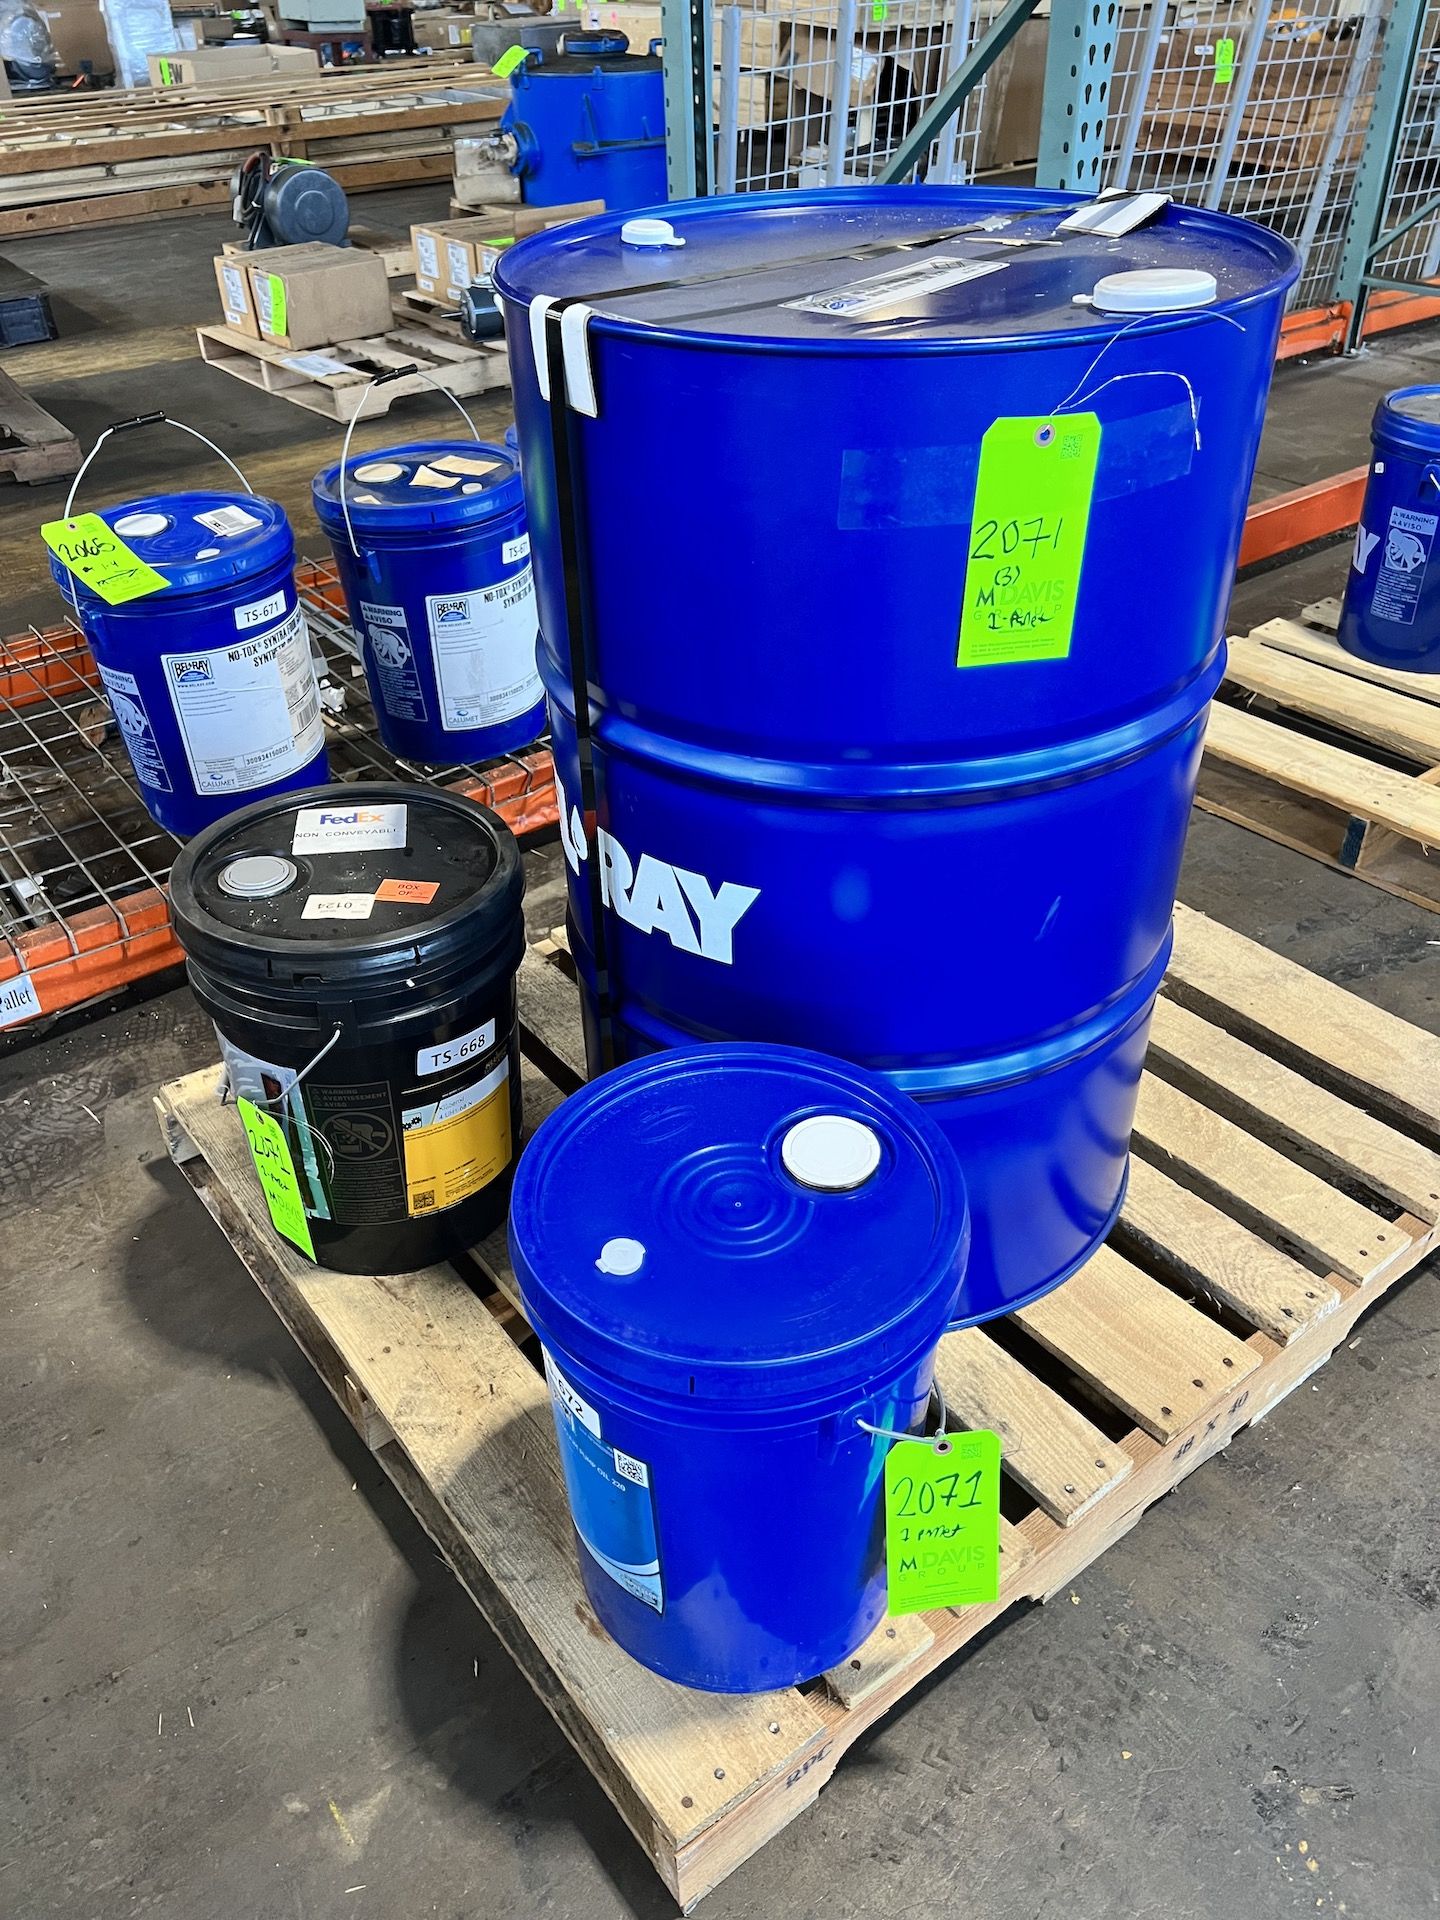 55-GALLON DRUM OF BELRAY NO-TOX SYNTRA FOOD GRADE SYNTHETIC OIL 220, (2) 5-GALLON BUCKETS OF OIL